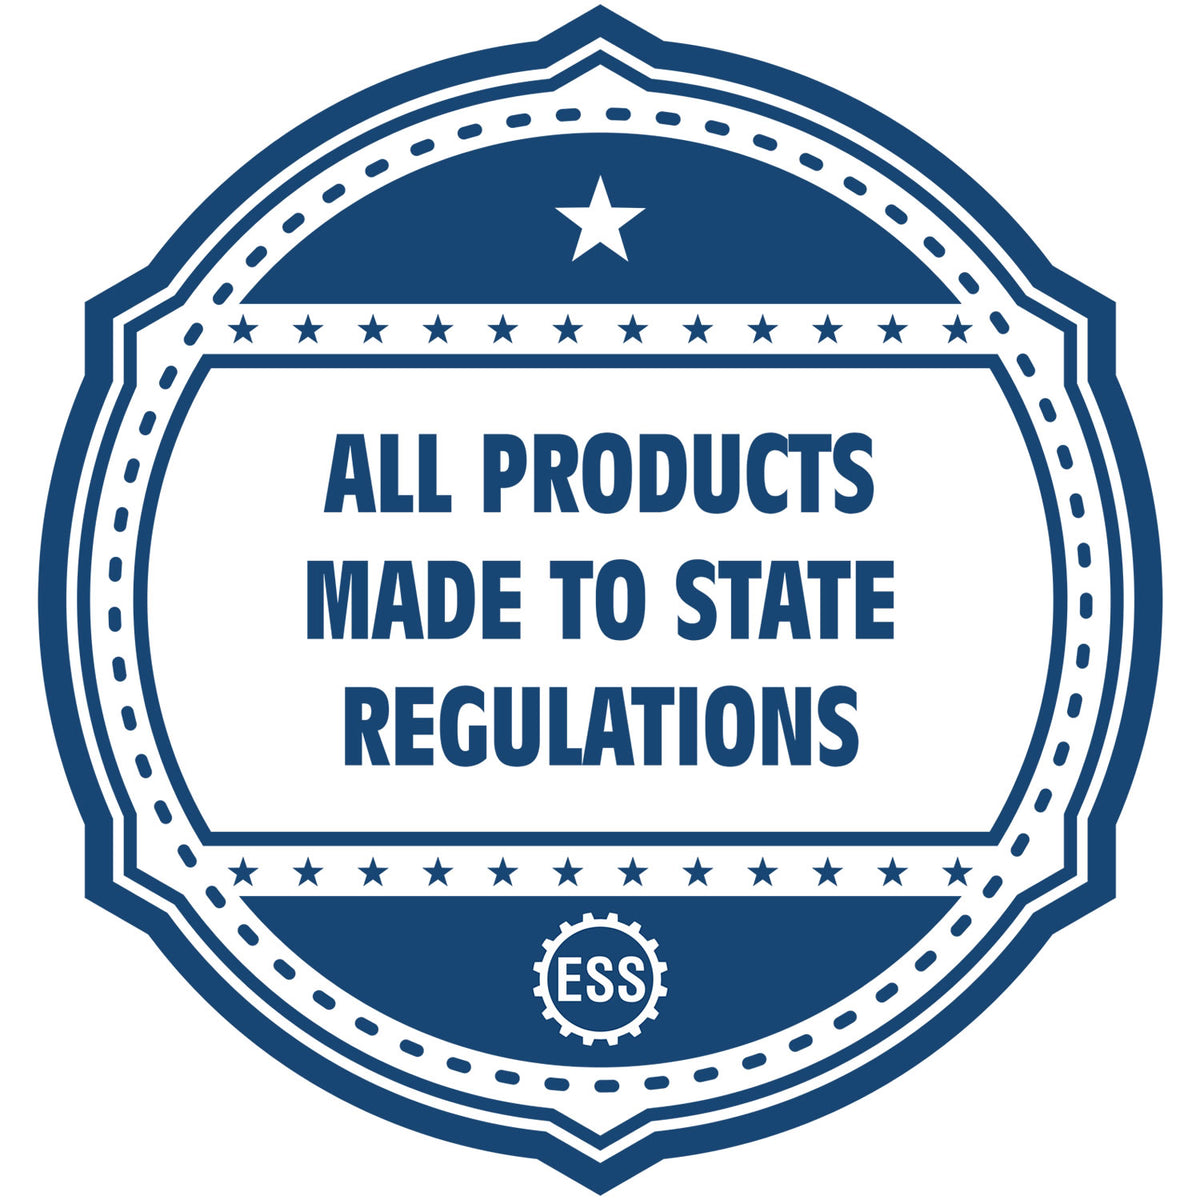 An icon or badge element for the North Carolina Professional Engineer Seal Stamp showing that this product is made in compliance with state regulations.